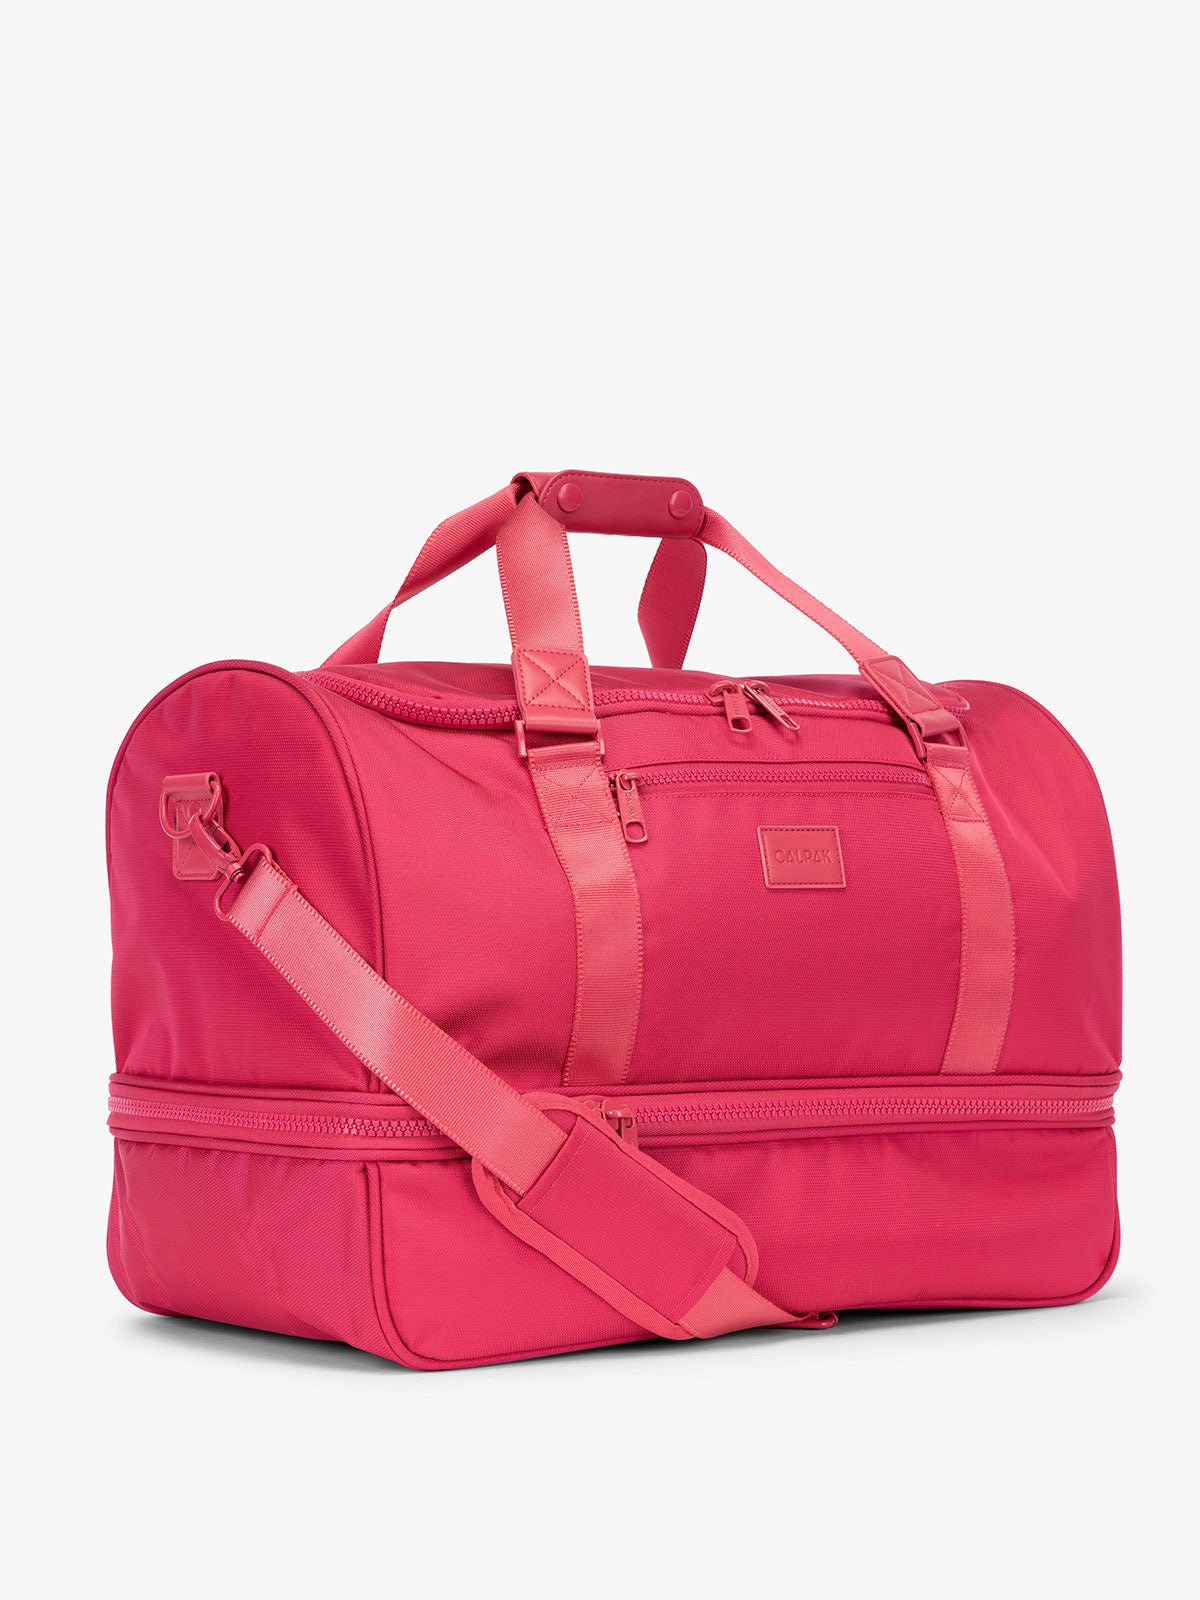 Side-view of pink dragonfruit CALPAK Stevyn Duffel with strap, carry handles, and zippered compartments